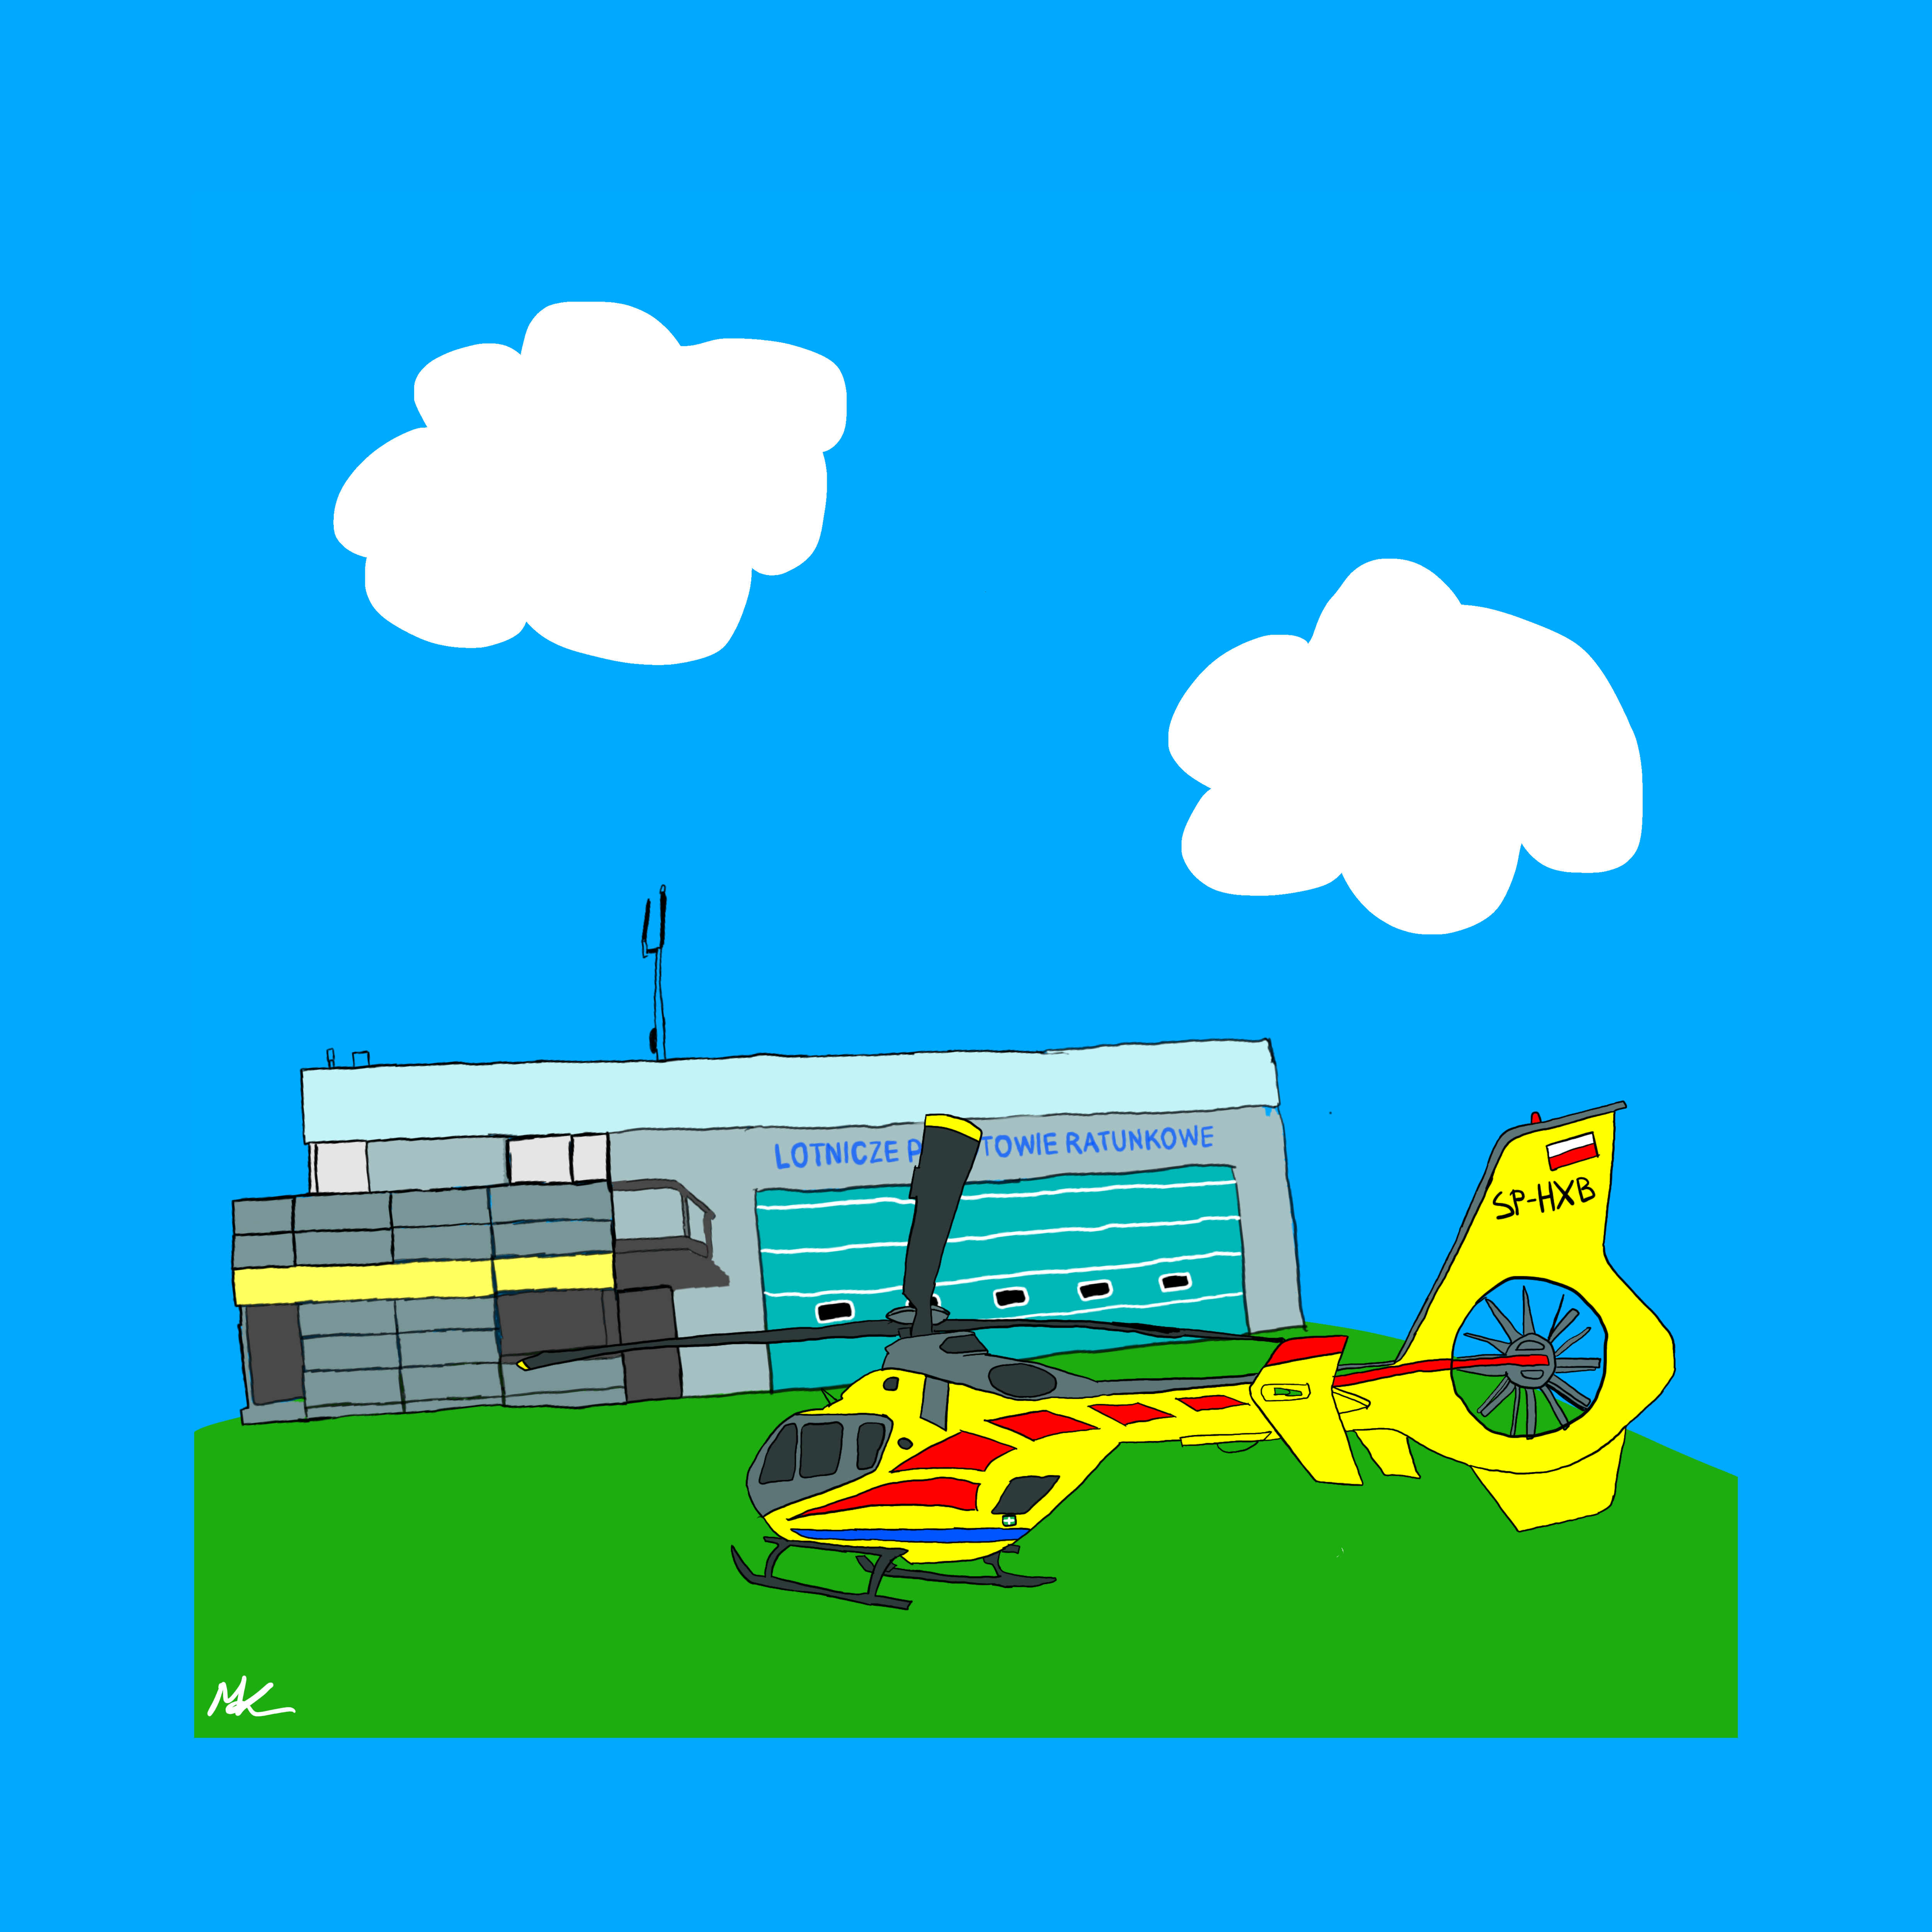 General 5000x5000 Ec135 HEMS digital art Poland helicopters airport signature clouds simple background